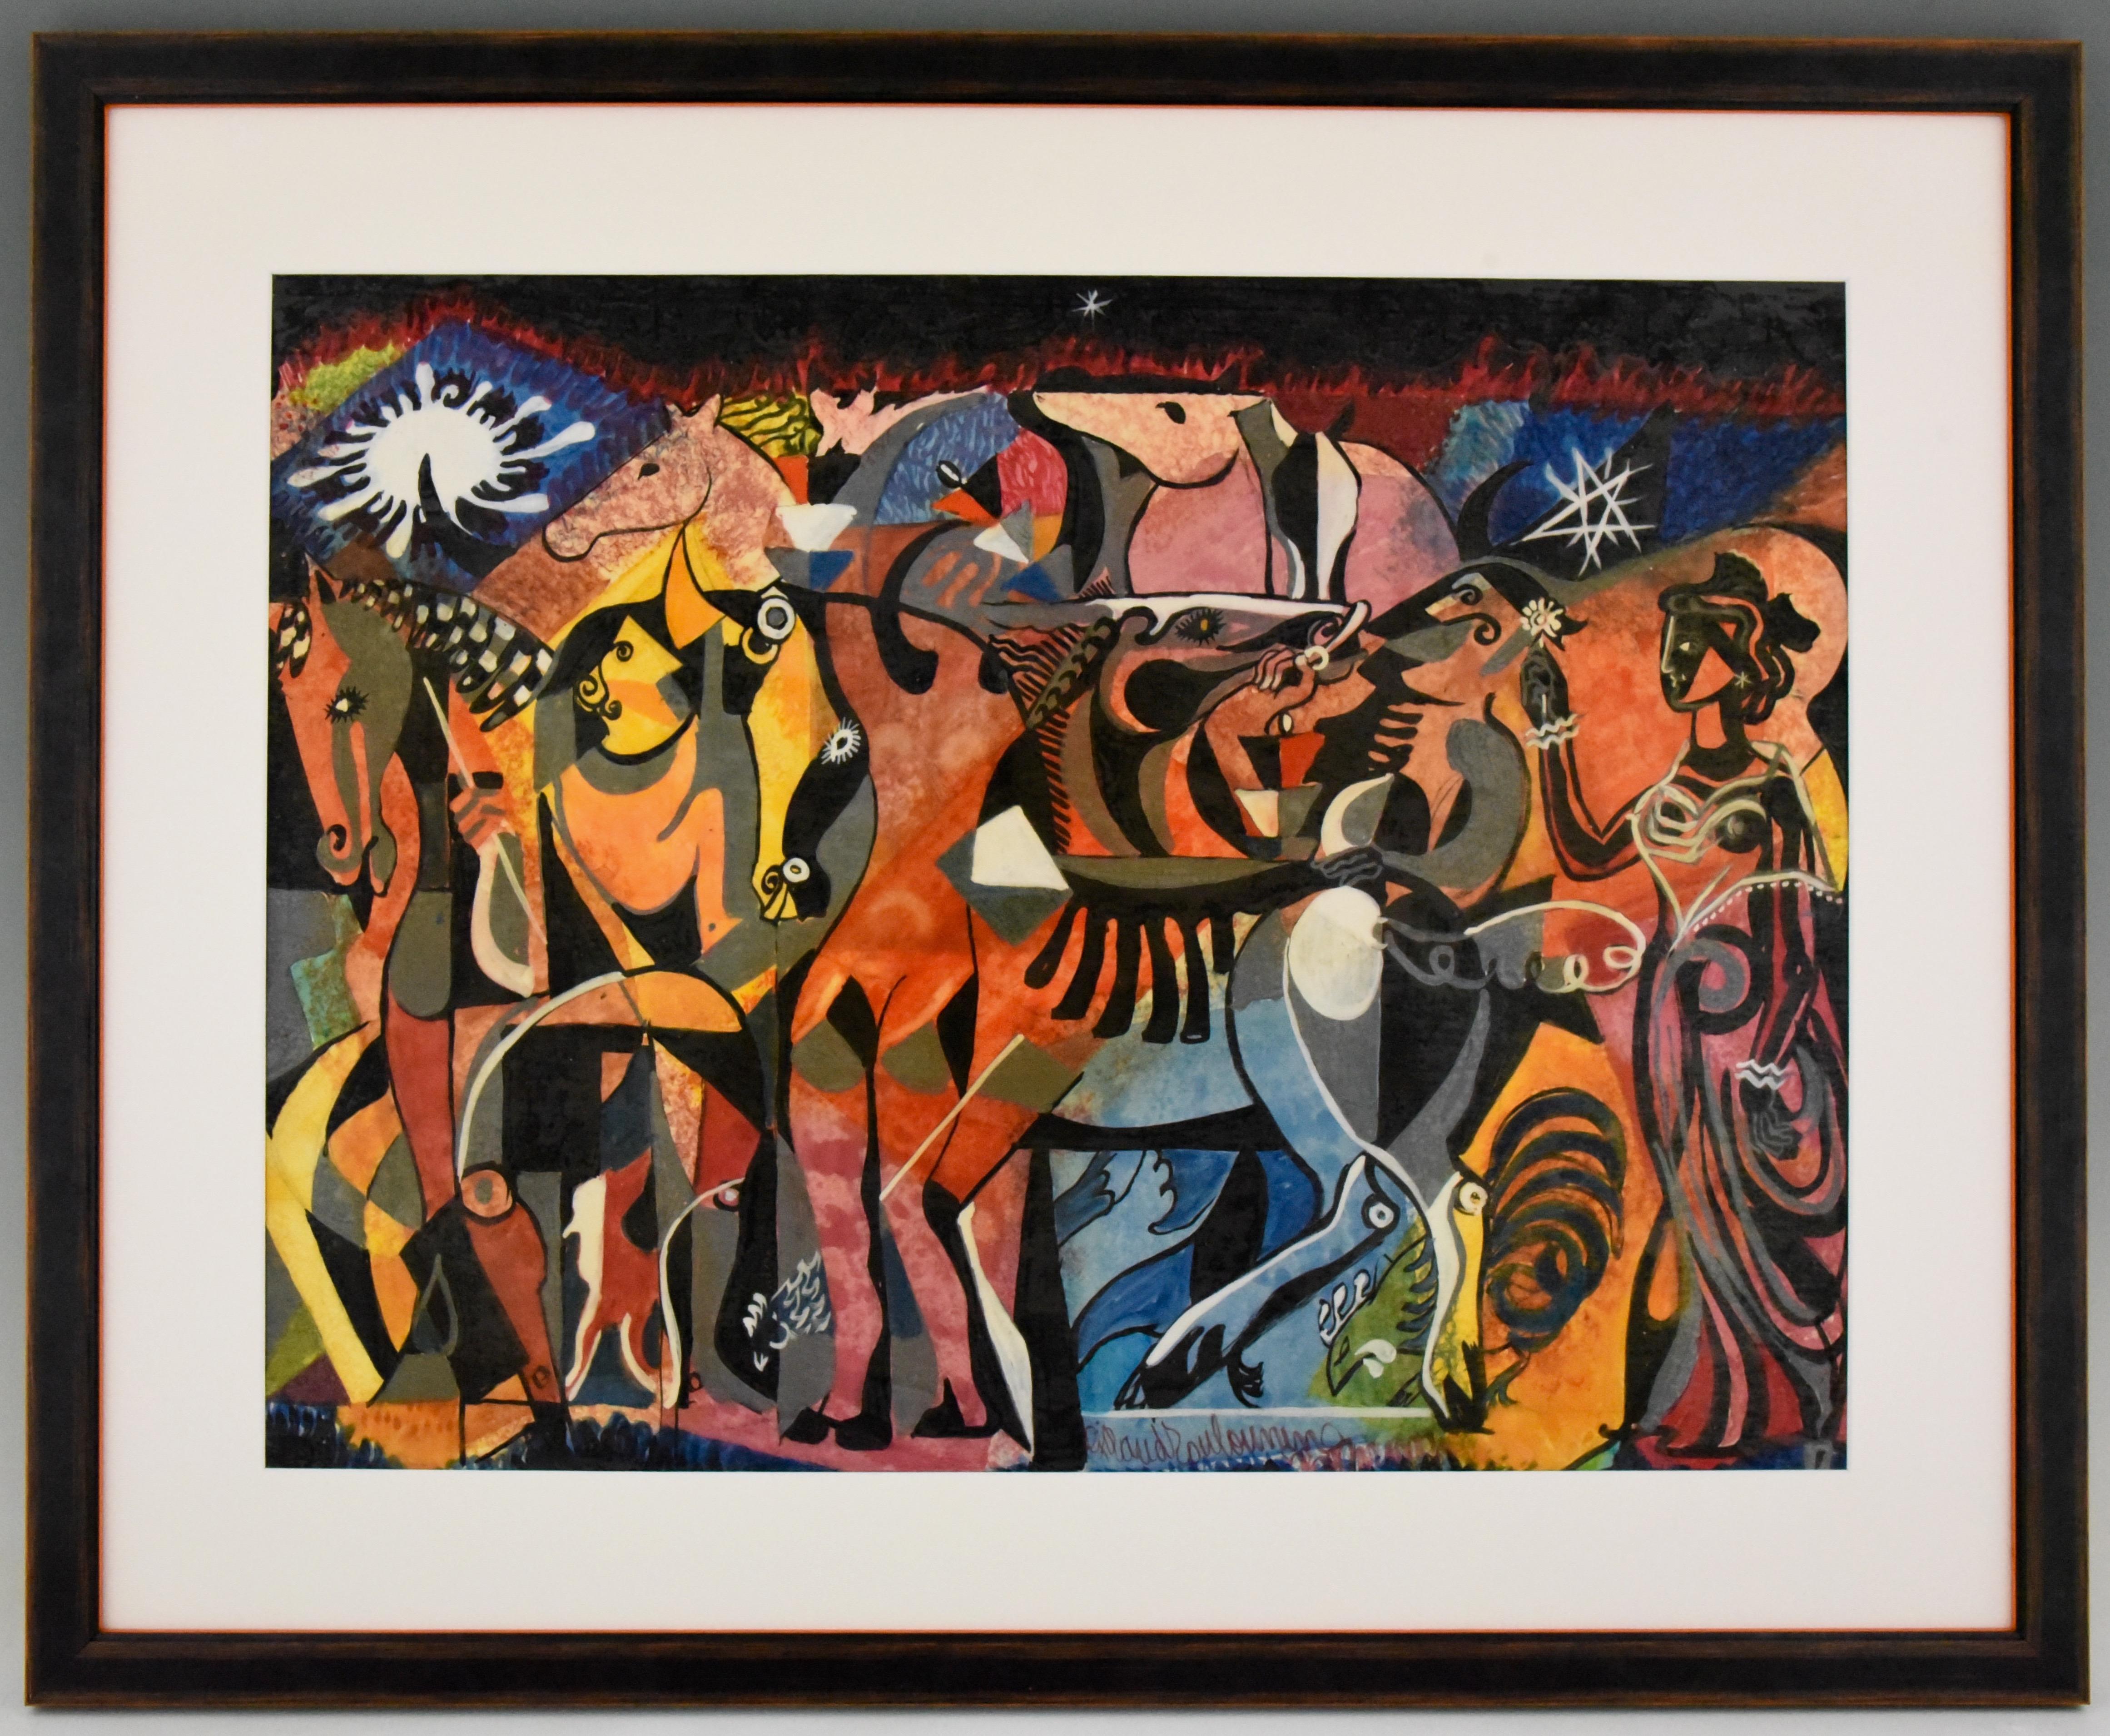 Colorful circus scene with horses, male and female figures.
Mid Century watercolor painting by Louis Giraud, circa 1960. 
Size of the frame: 
H. 66 cm x L. 81.5 cm. 
H. 26 inch x L. 32 inch. 
Size of the work: 
H. 48 cm x L. 63 cm. 
H. 18.9